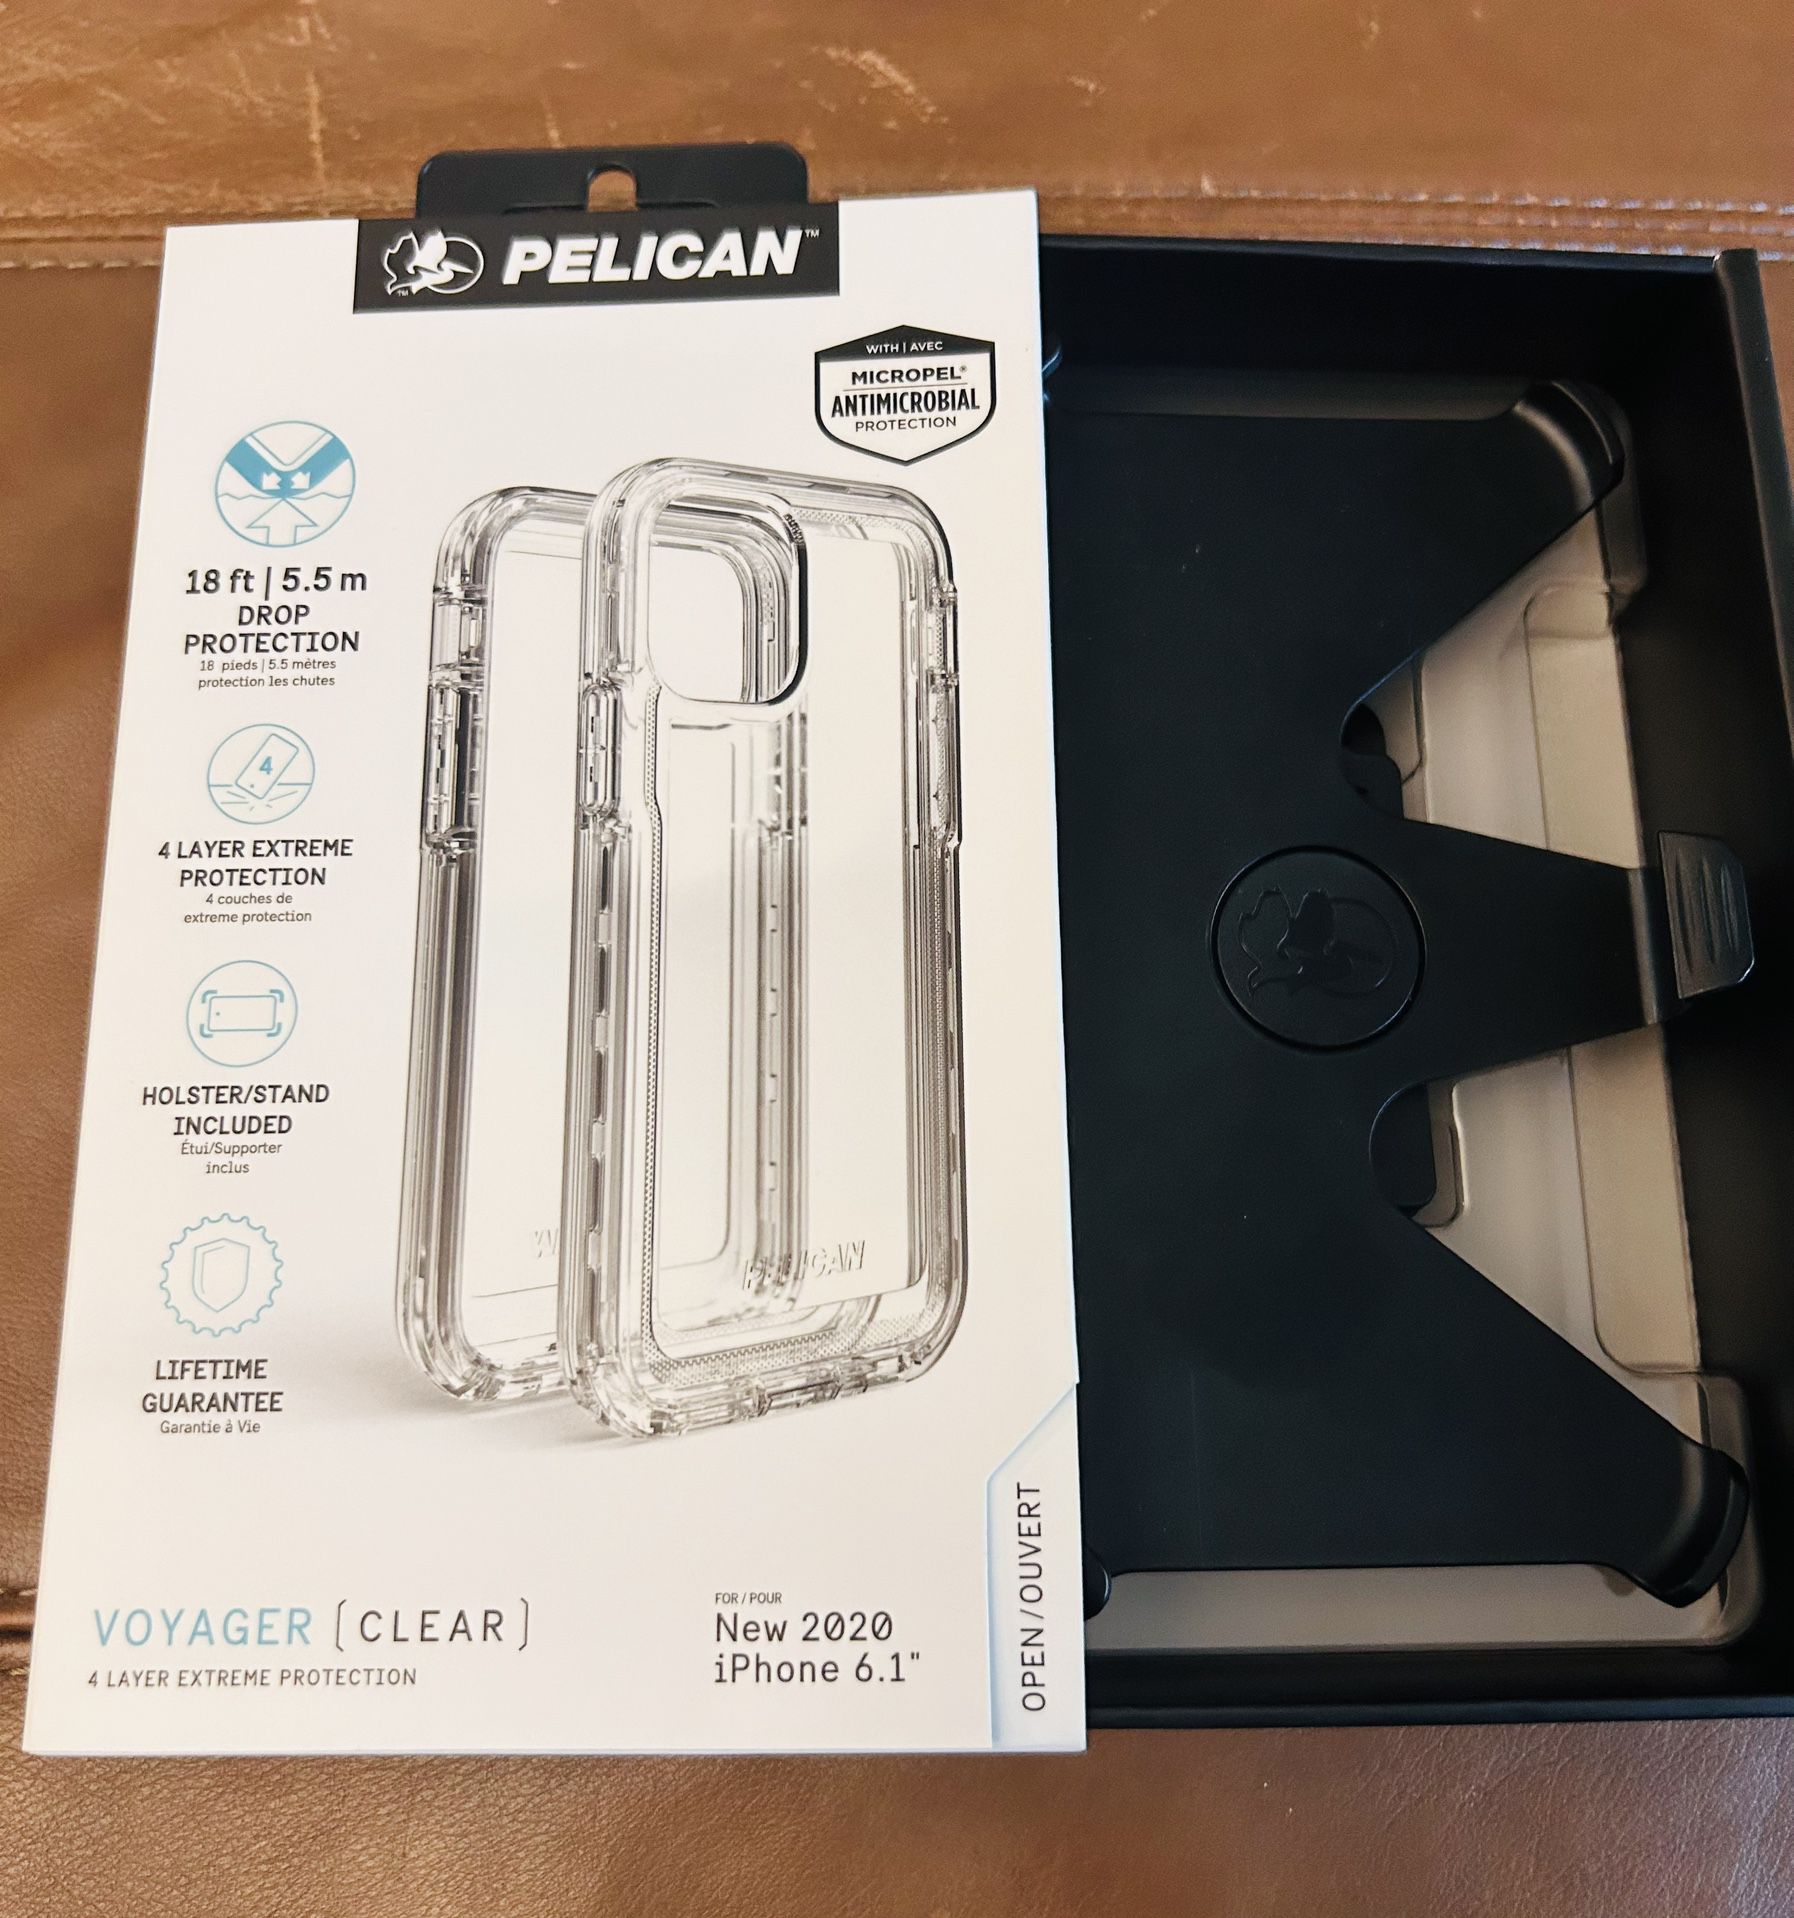 Pelican Replacement Clip Only - SALE